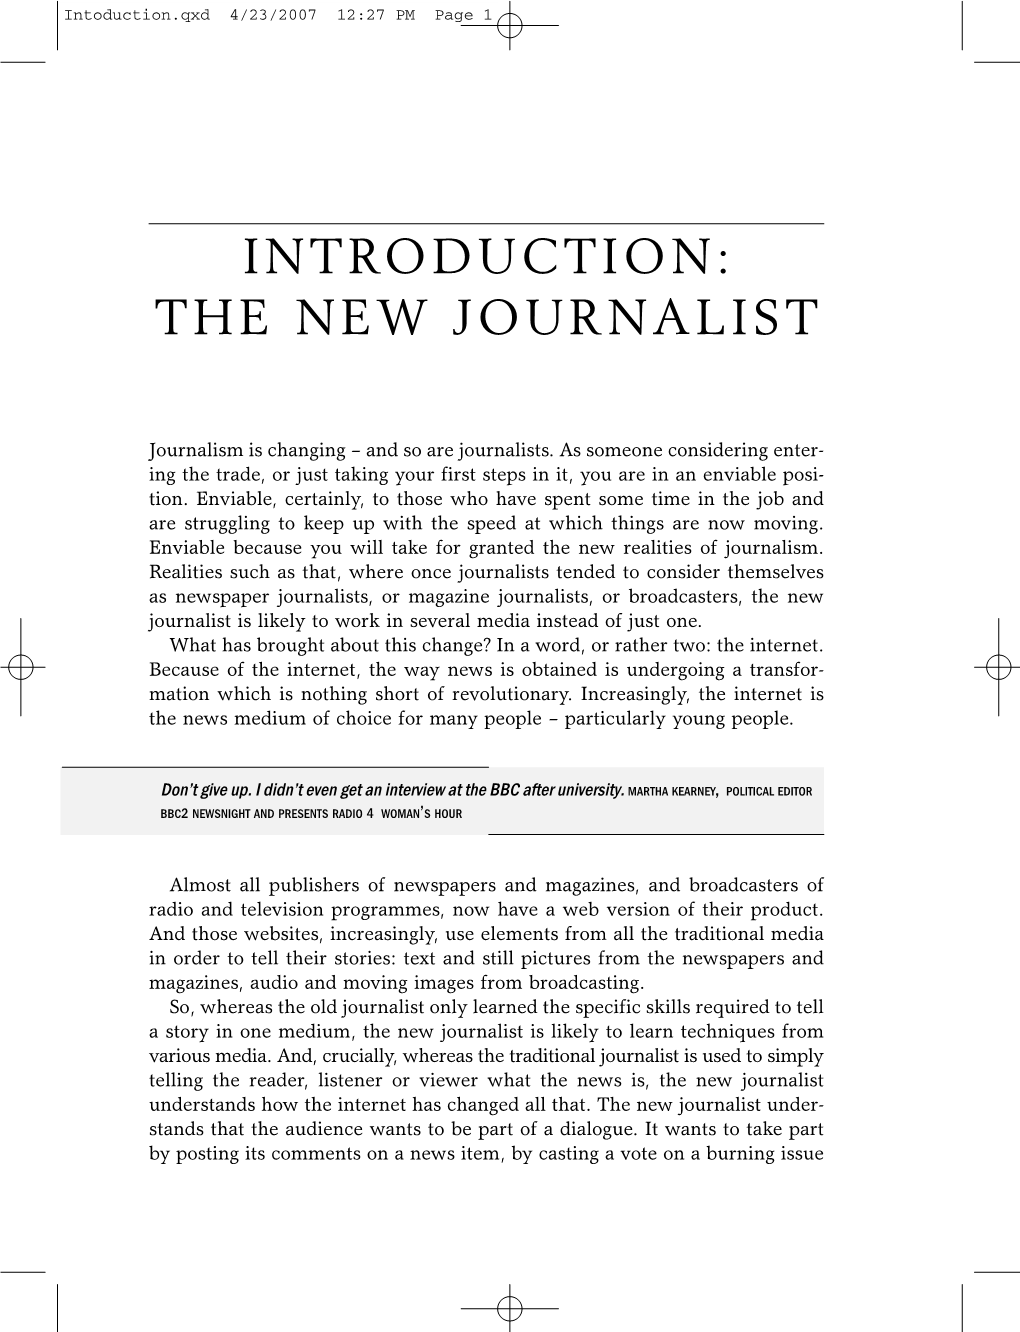 Introduction: the New Journalist